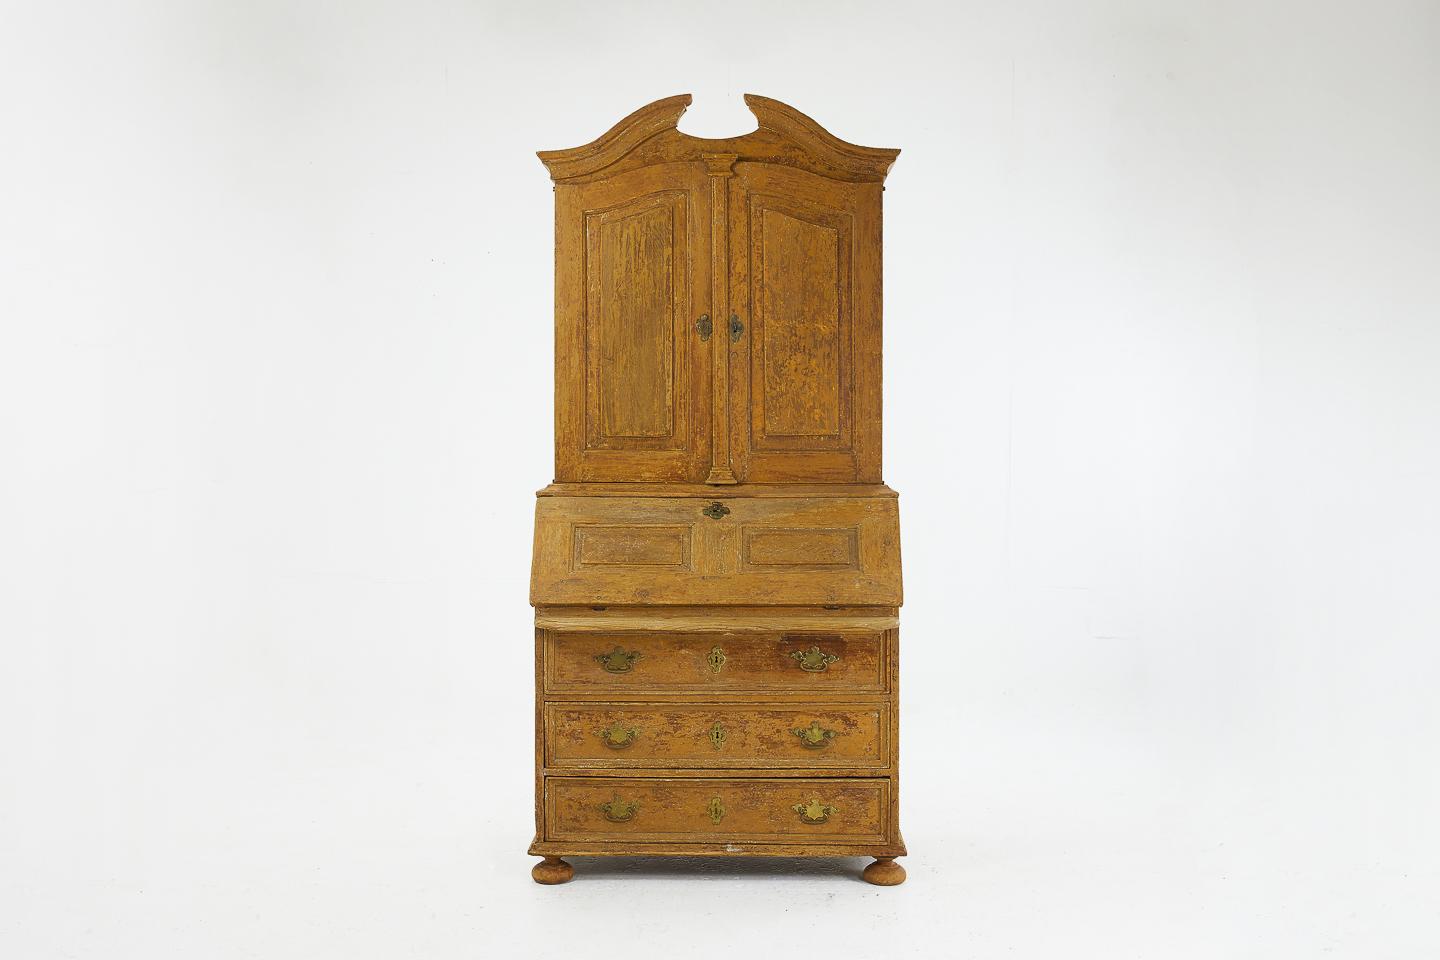 18th century painted bureau cabinet. Increasingly difficult to find in original paint now. Charming smaller proportions.